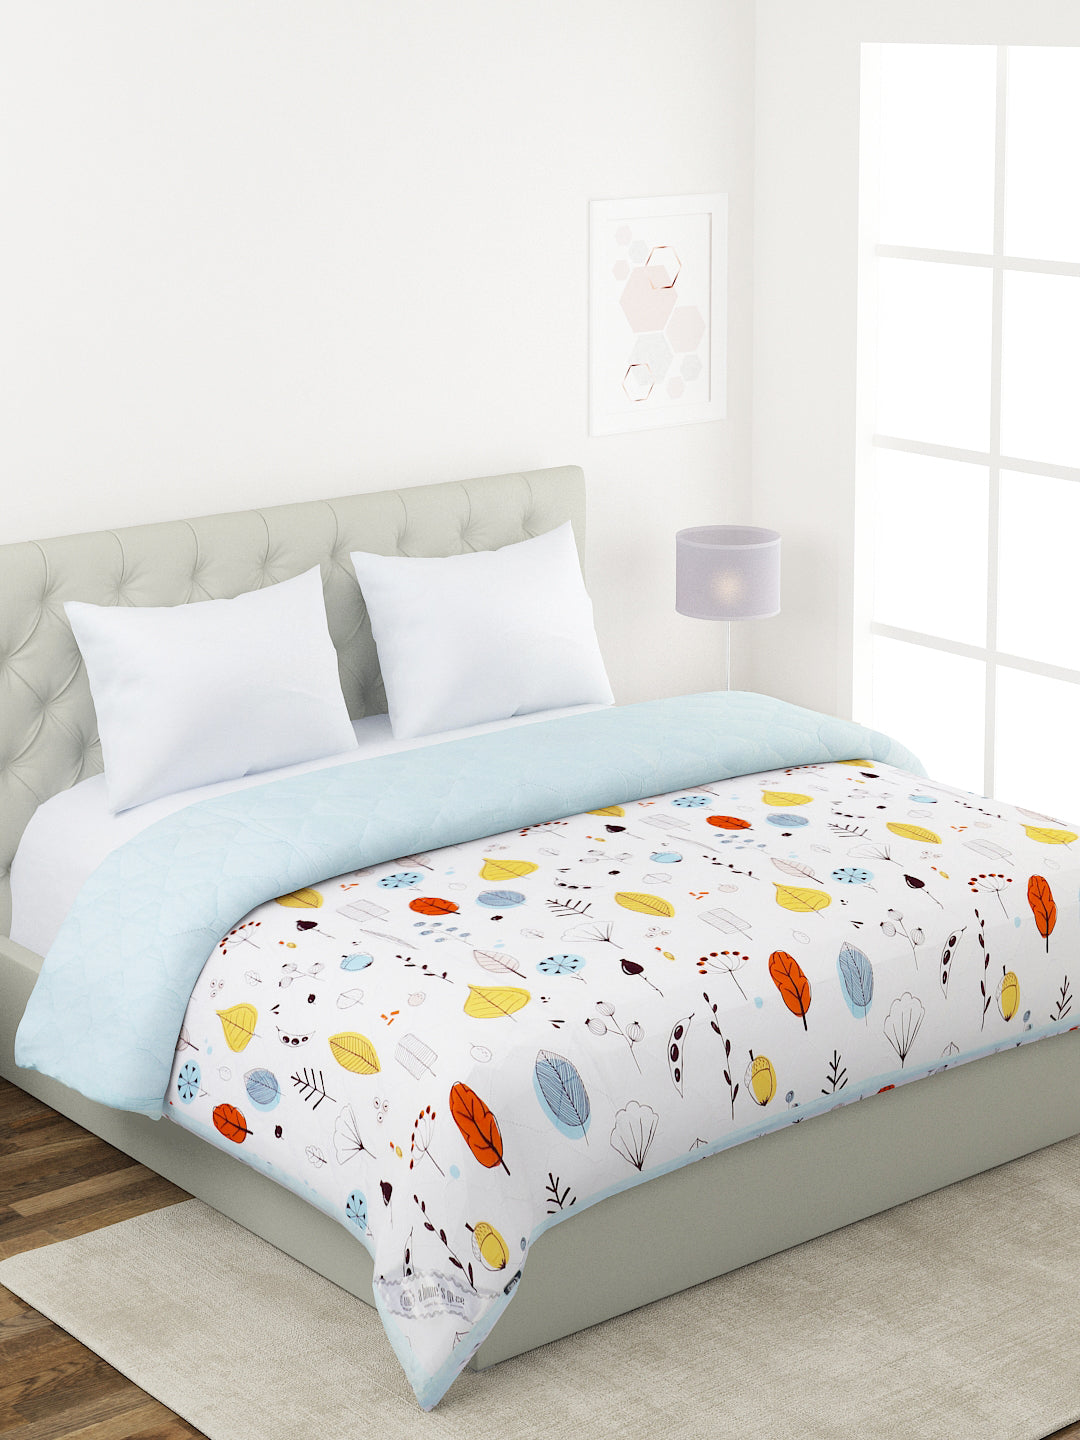 Floral Print Double Bed Light Weight Comforter-Multicolor